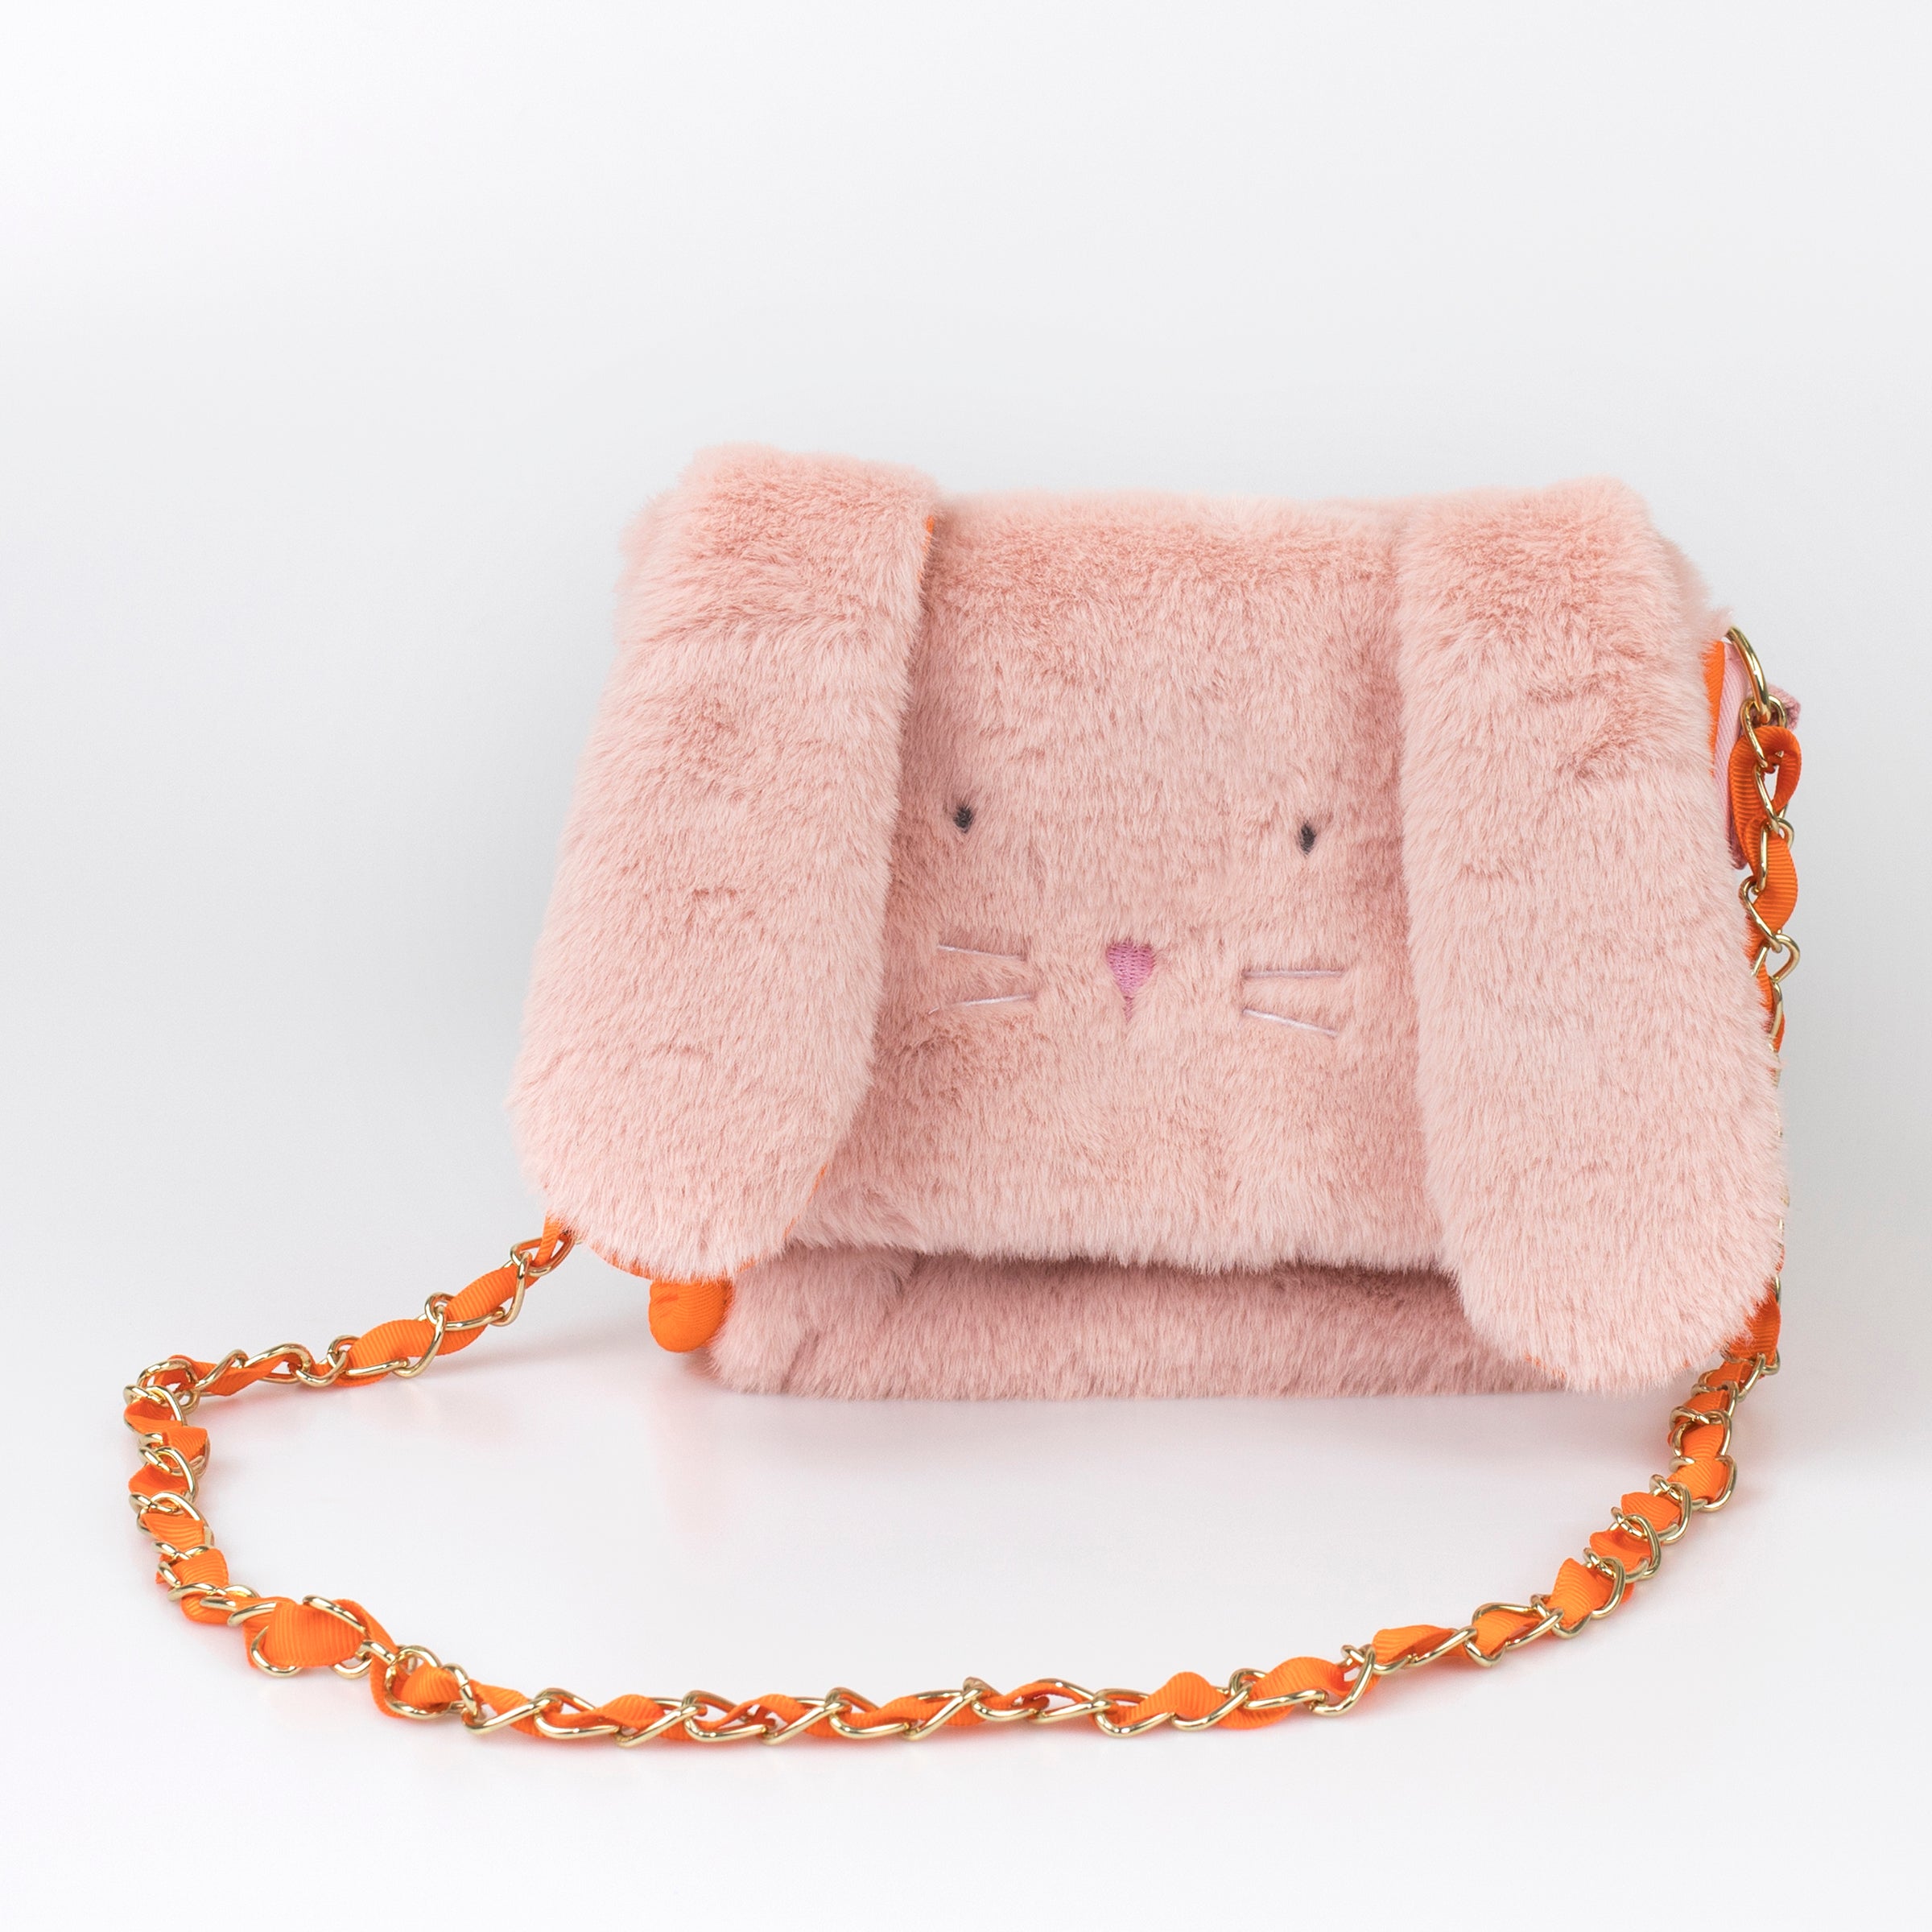 Our kids pink purse is crafted from soft plush in the shape of an adorable bunny with floppy ears.